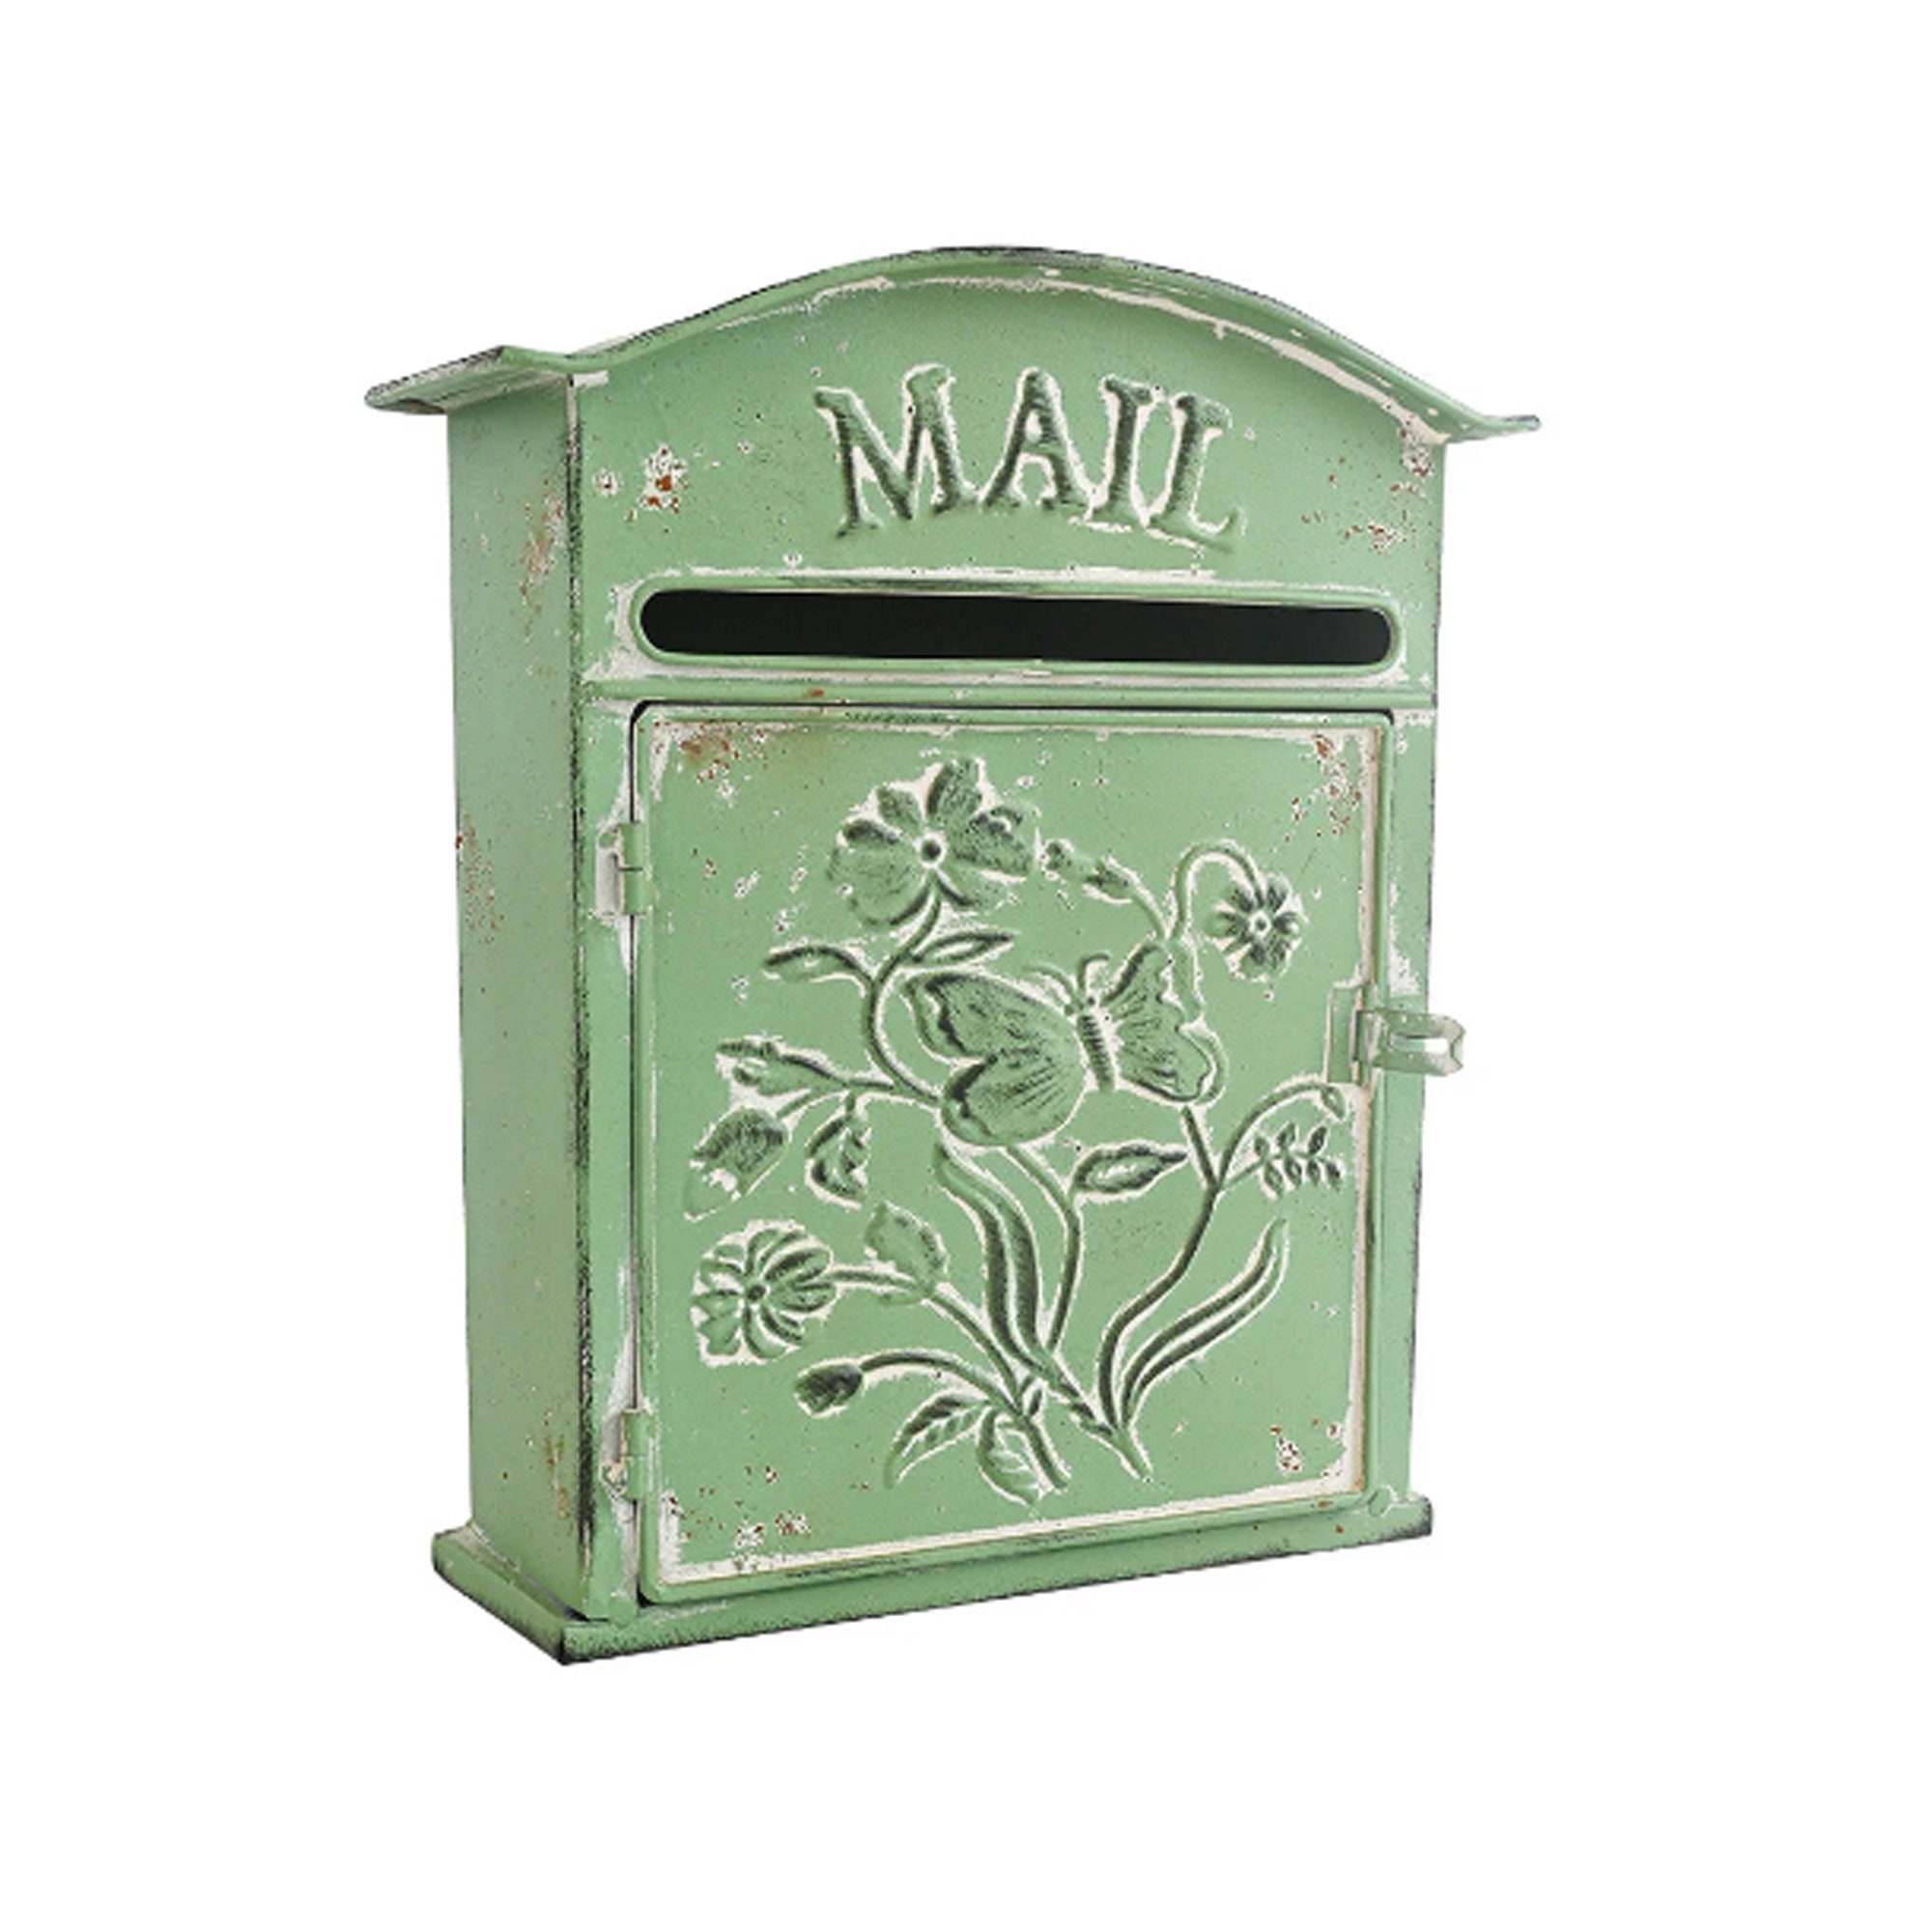 LARGE VINTAGE OUTDOOR LOCKABLE LETTER POST BOX MAILBOX WALL